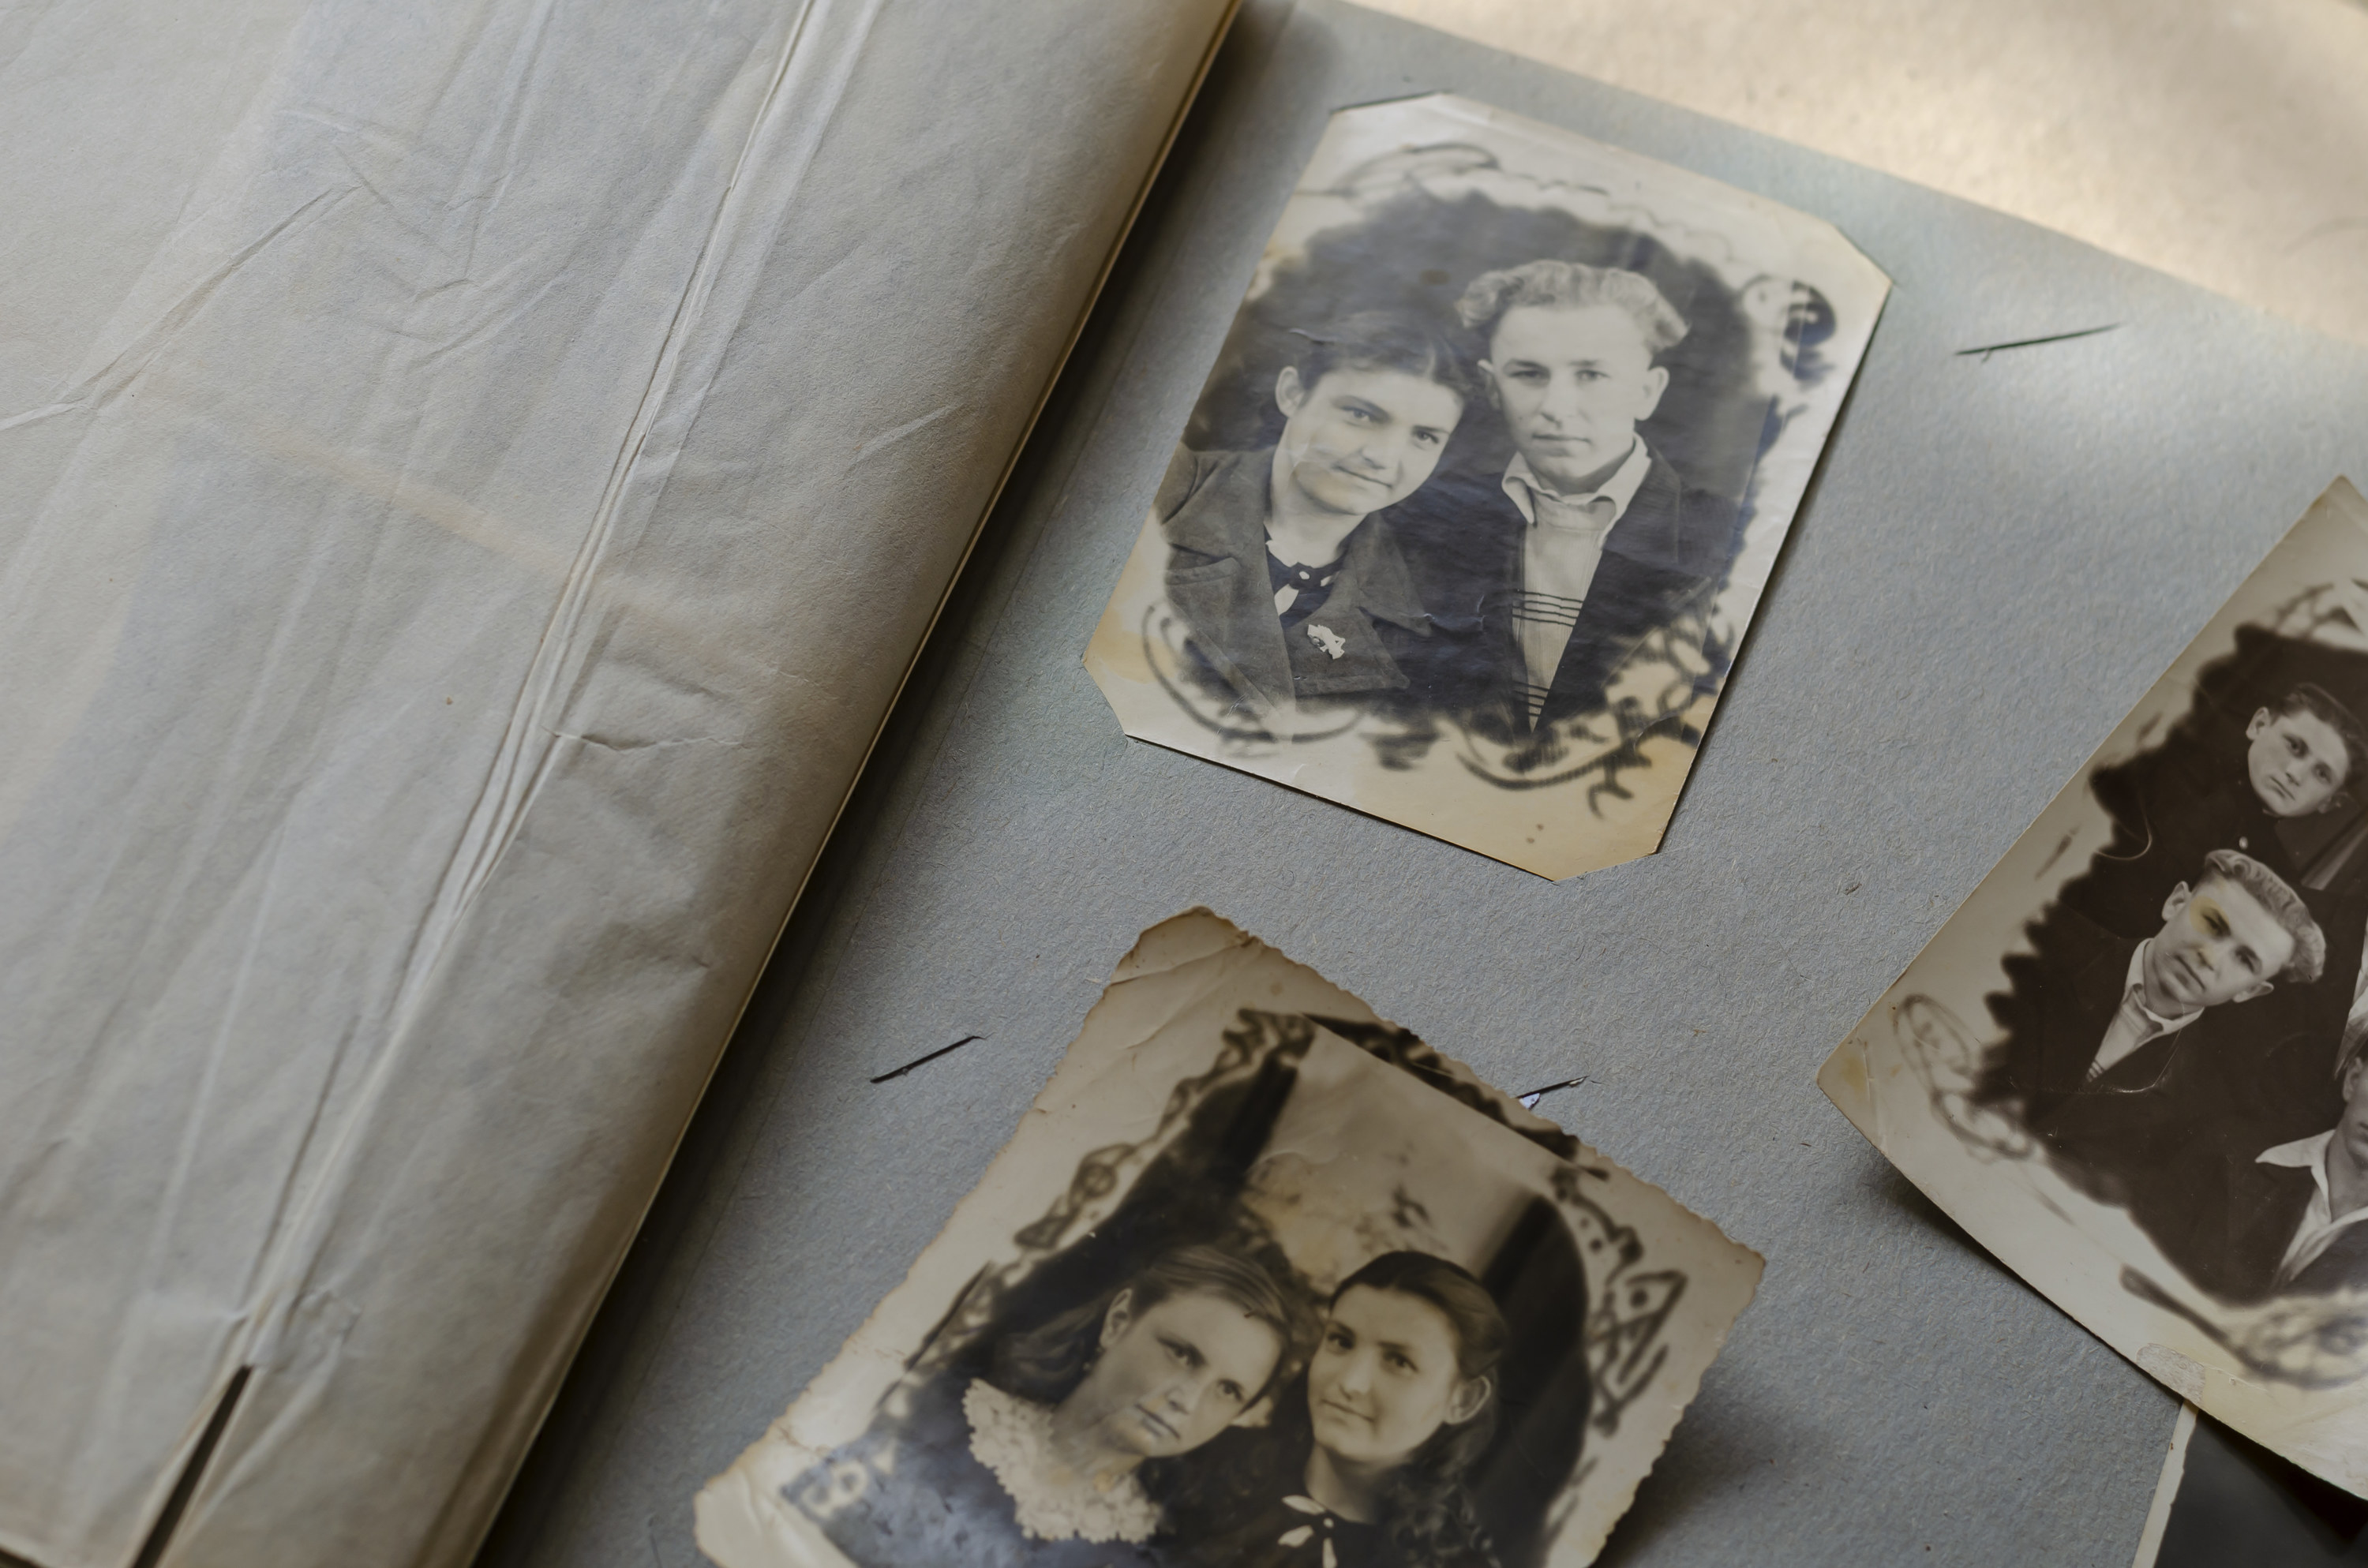 Book with old photos inside